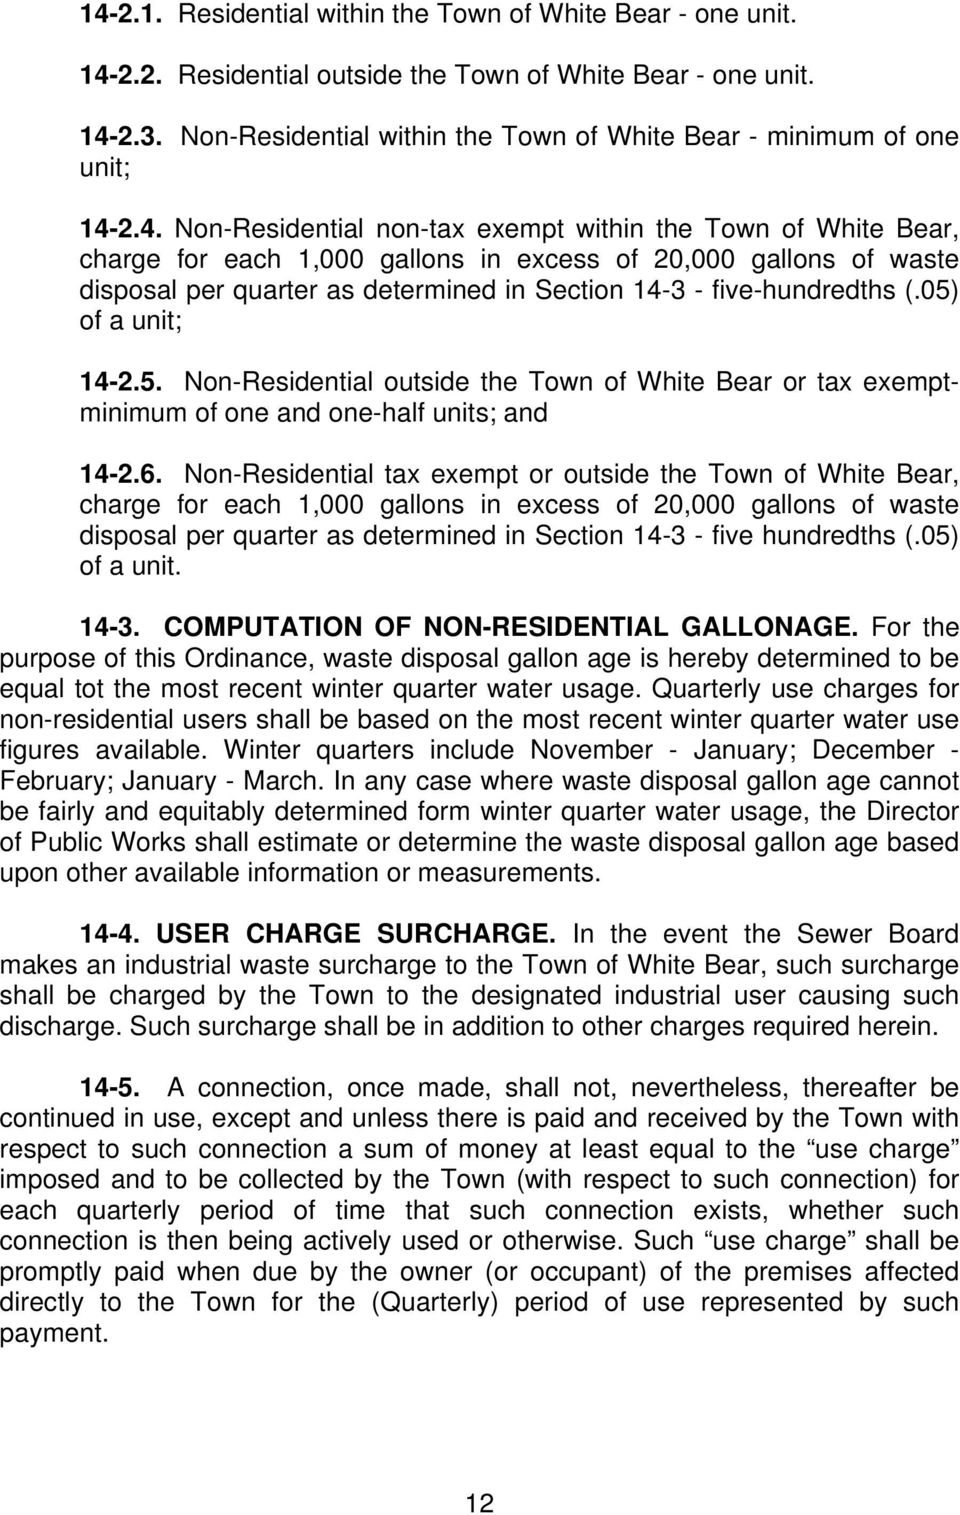 2.4. Non-Residential non-tax exempt within the Town of White Bear, charge for each 1,000 gallons in excess of 20,000 gallons of waste disposal per quarter as determined in Section 14-3 -